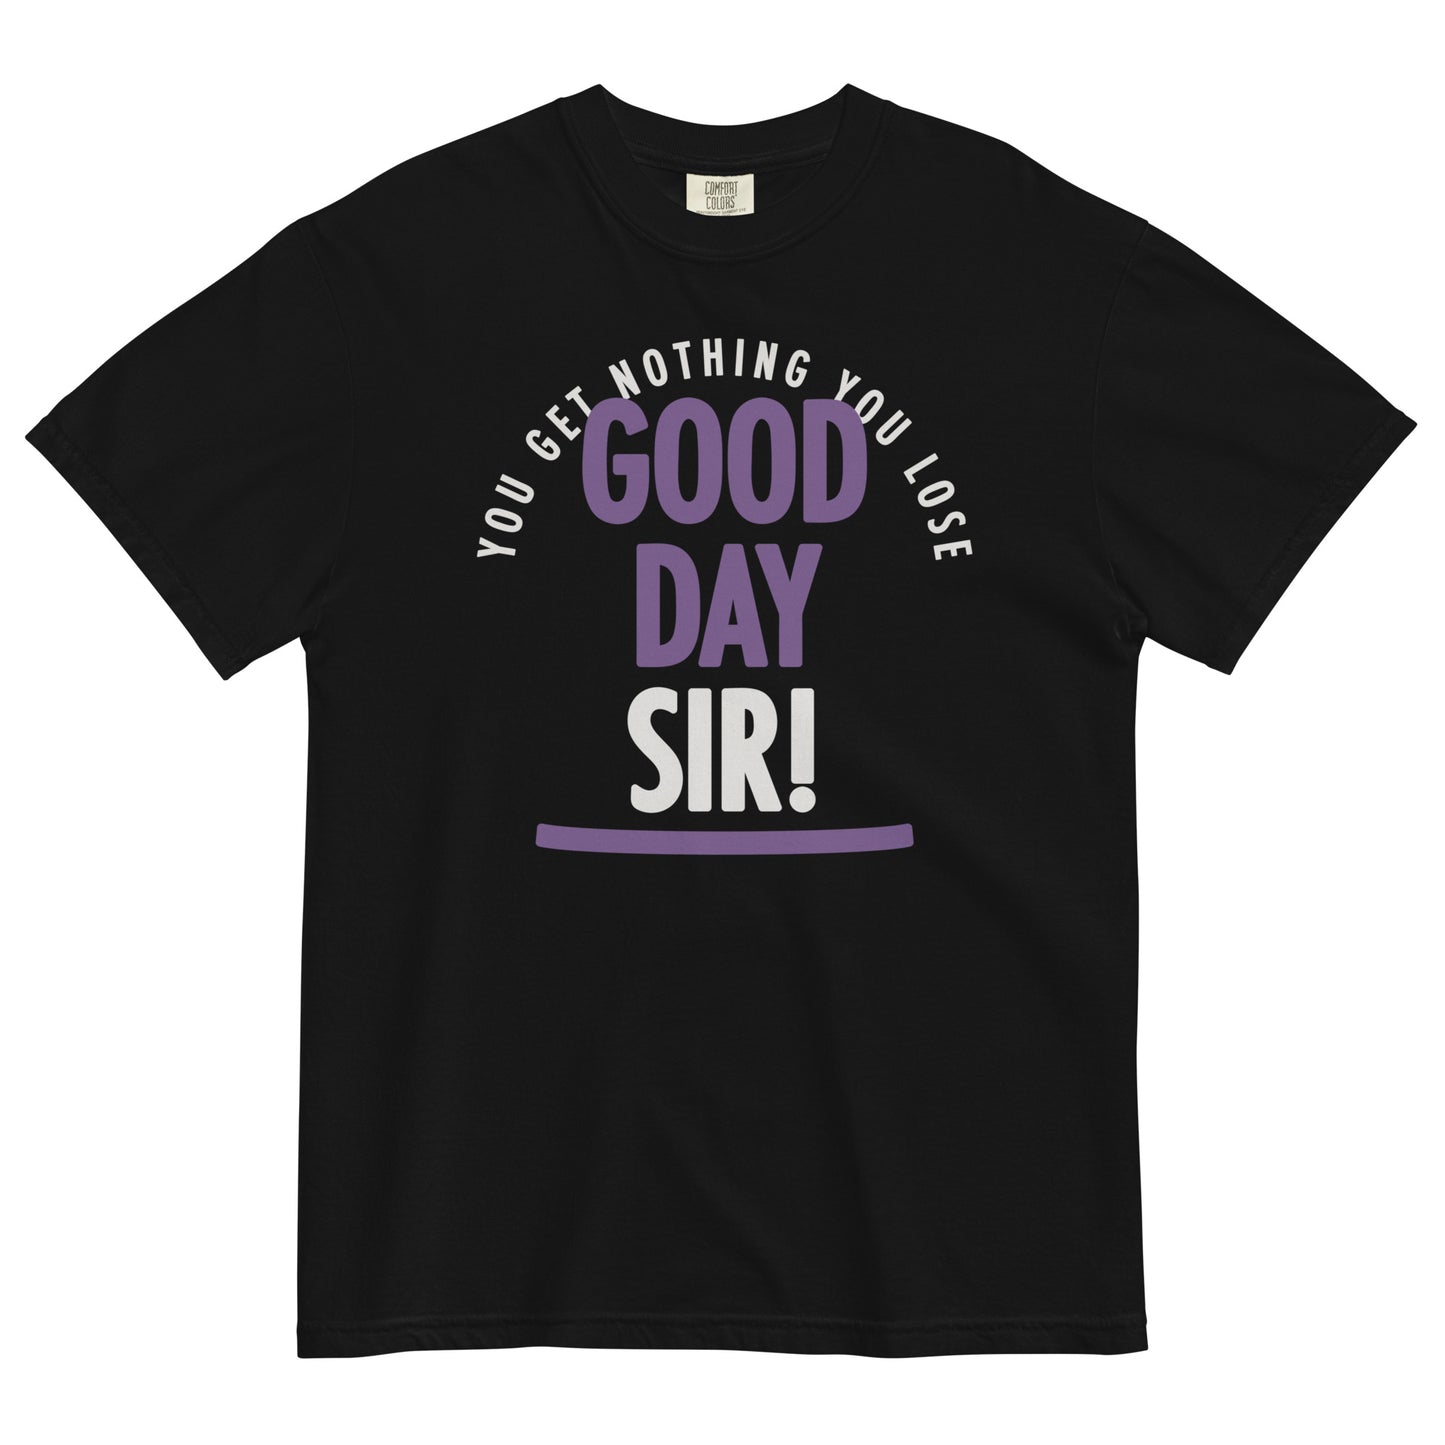 Good Day Sir! Men's Relaxed Fit Tee